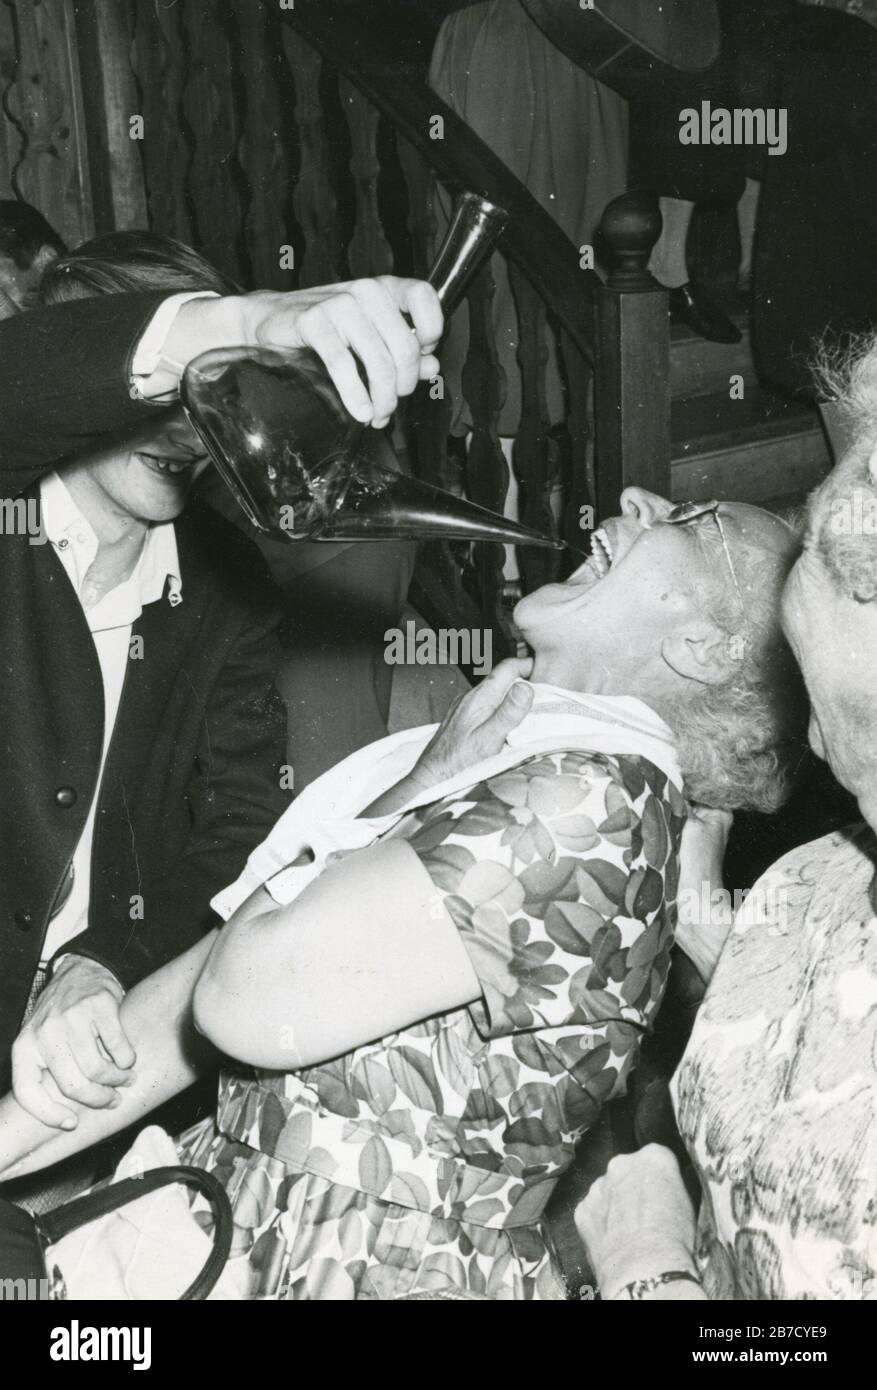 1960s black and white snapshot of an elderly lady wearing a flowery frock being forcefed wine or sangria from a porron by a young man whilst another elderly lady looks on in the foreground. Vernacular photography found photo (Same as Alamy image #2B7CYE7 without white border). Photographer unknown (Richard Bradley collection) Stock Photo